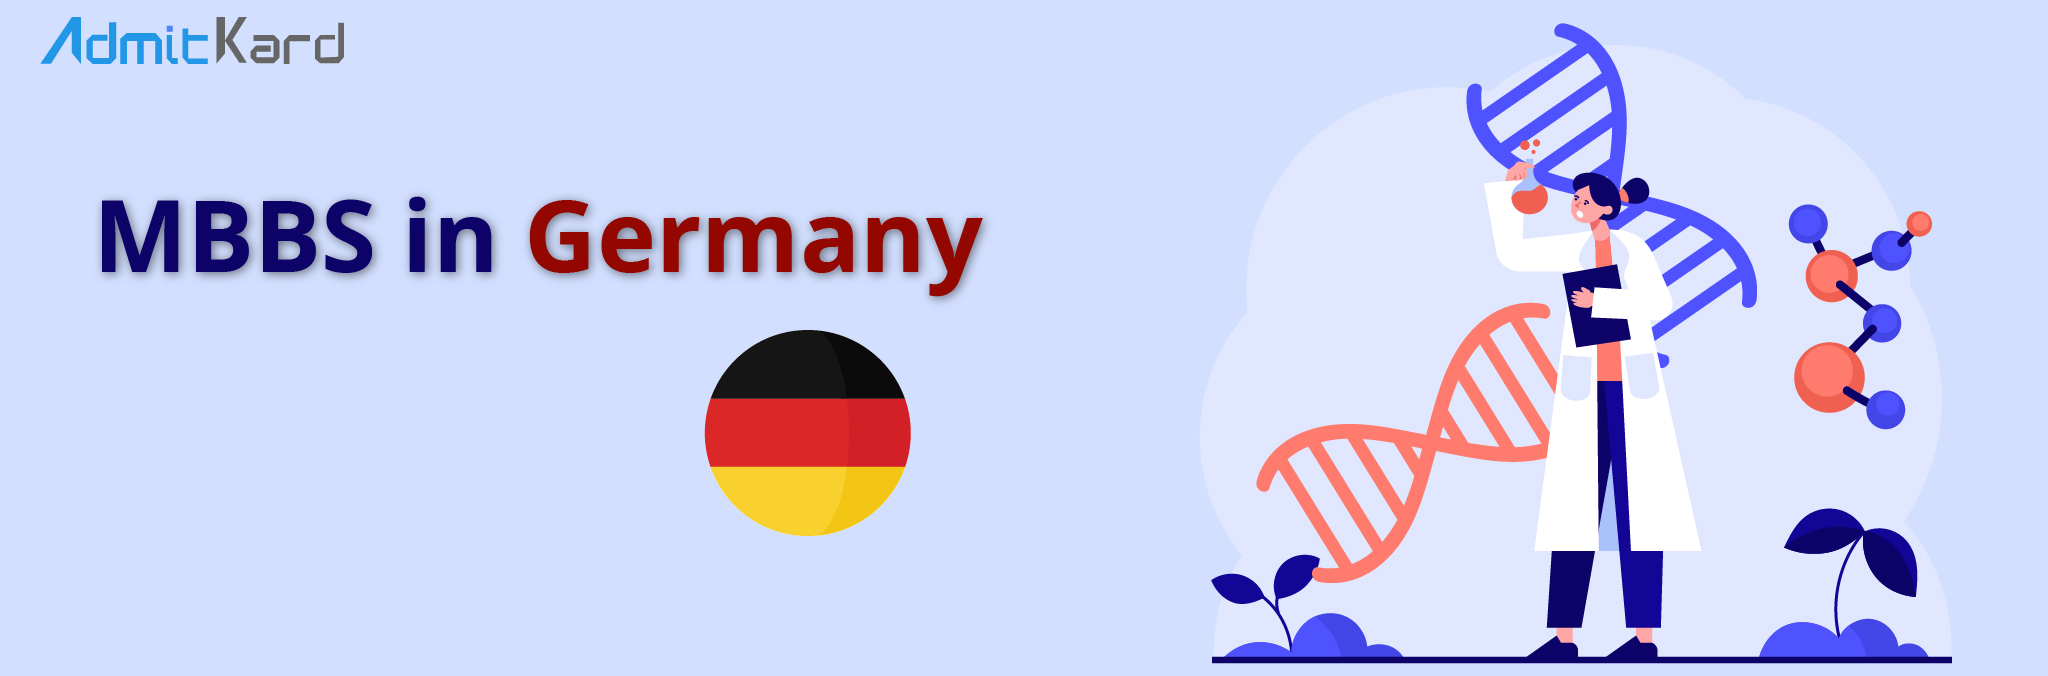 ﻿MBBS in Germany: Eligibility, Fees, Cost (updated 2022)